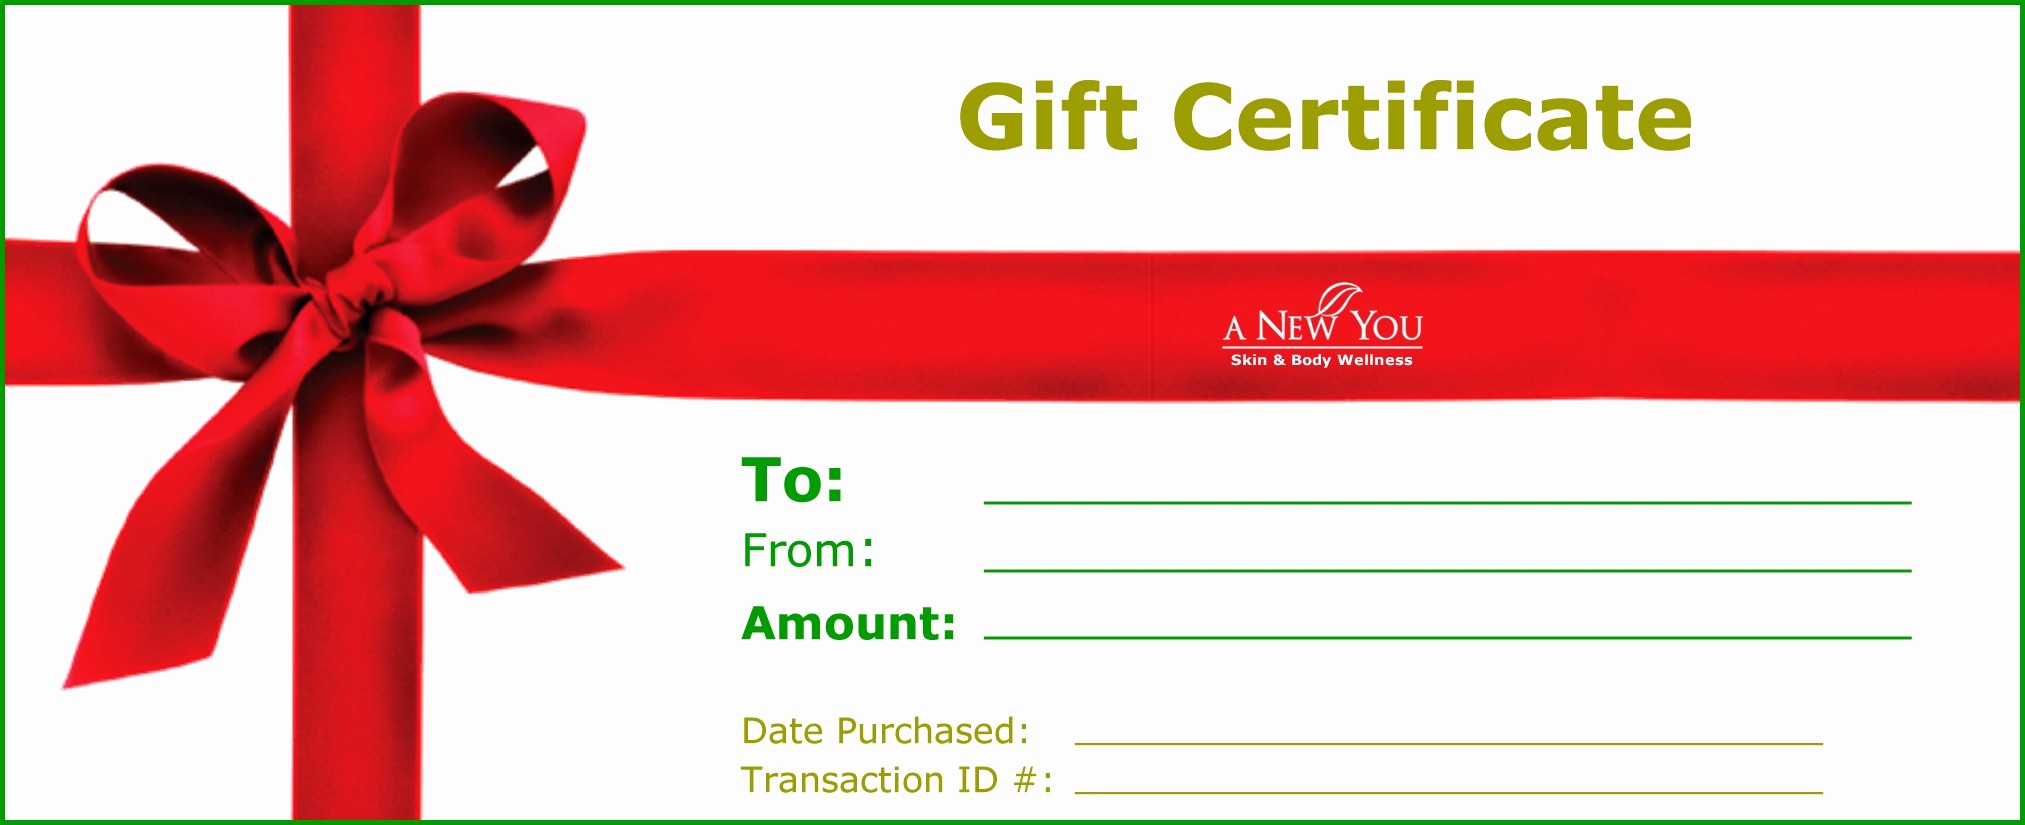 How to Make Gift Certificate Lovely Gift Certificate Template